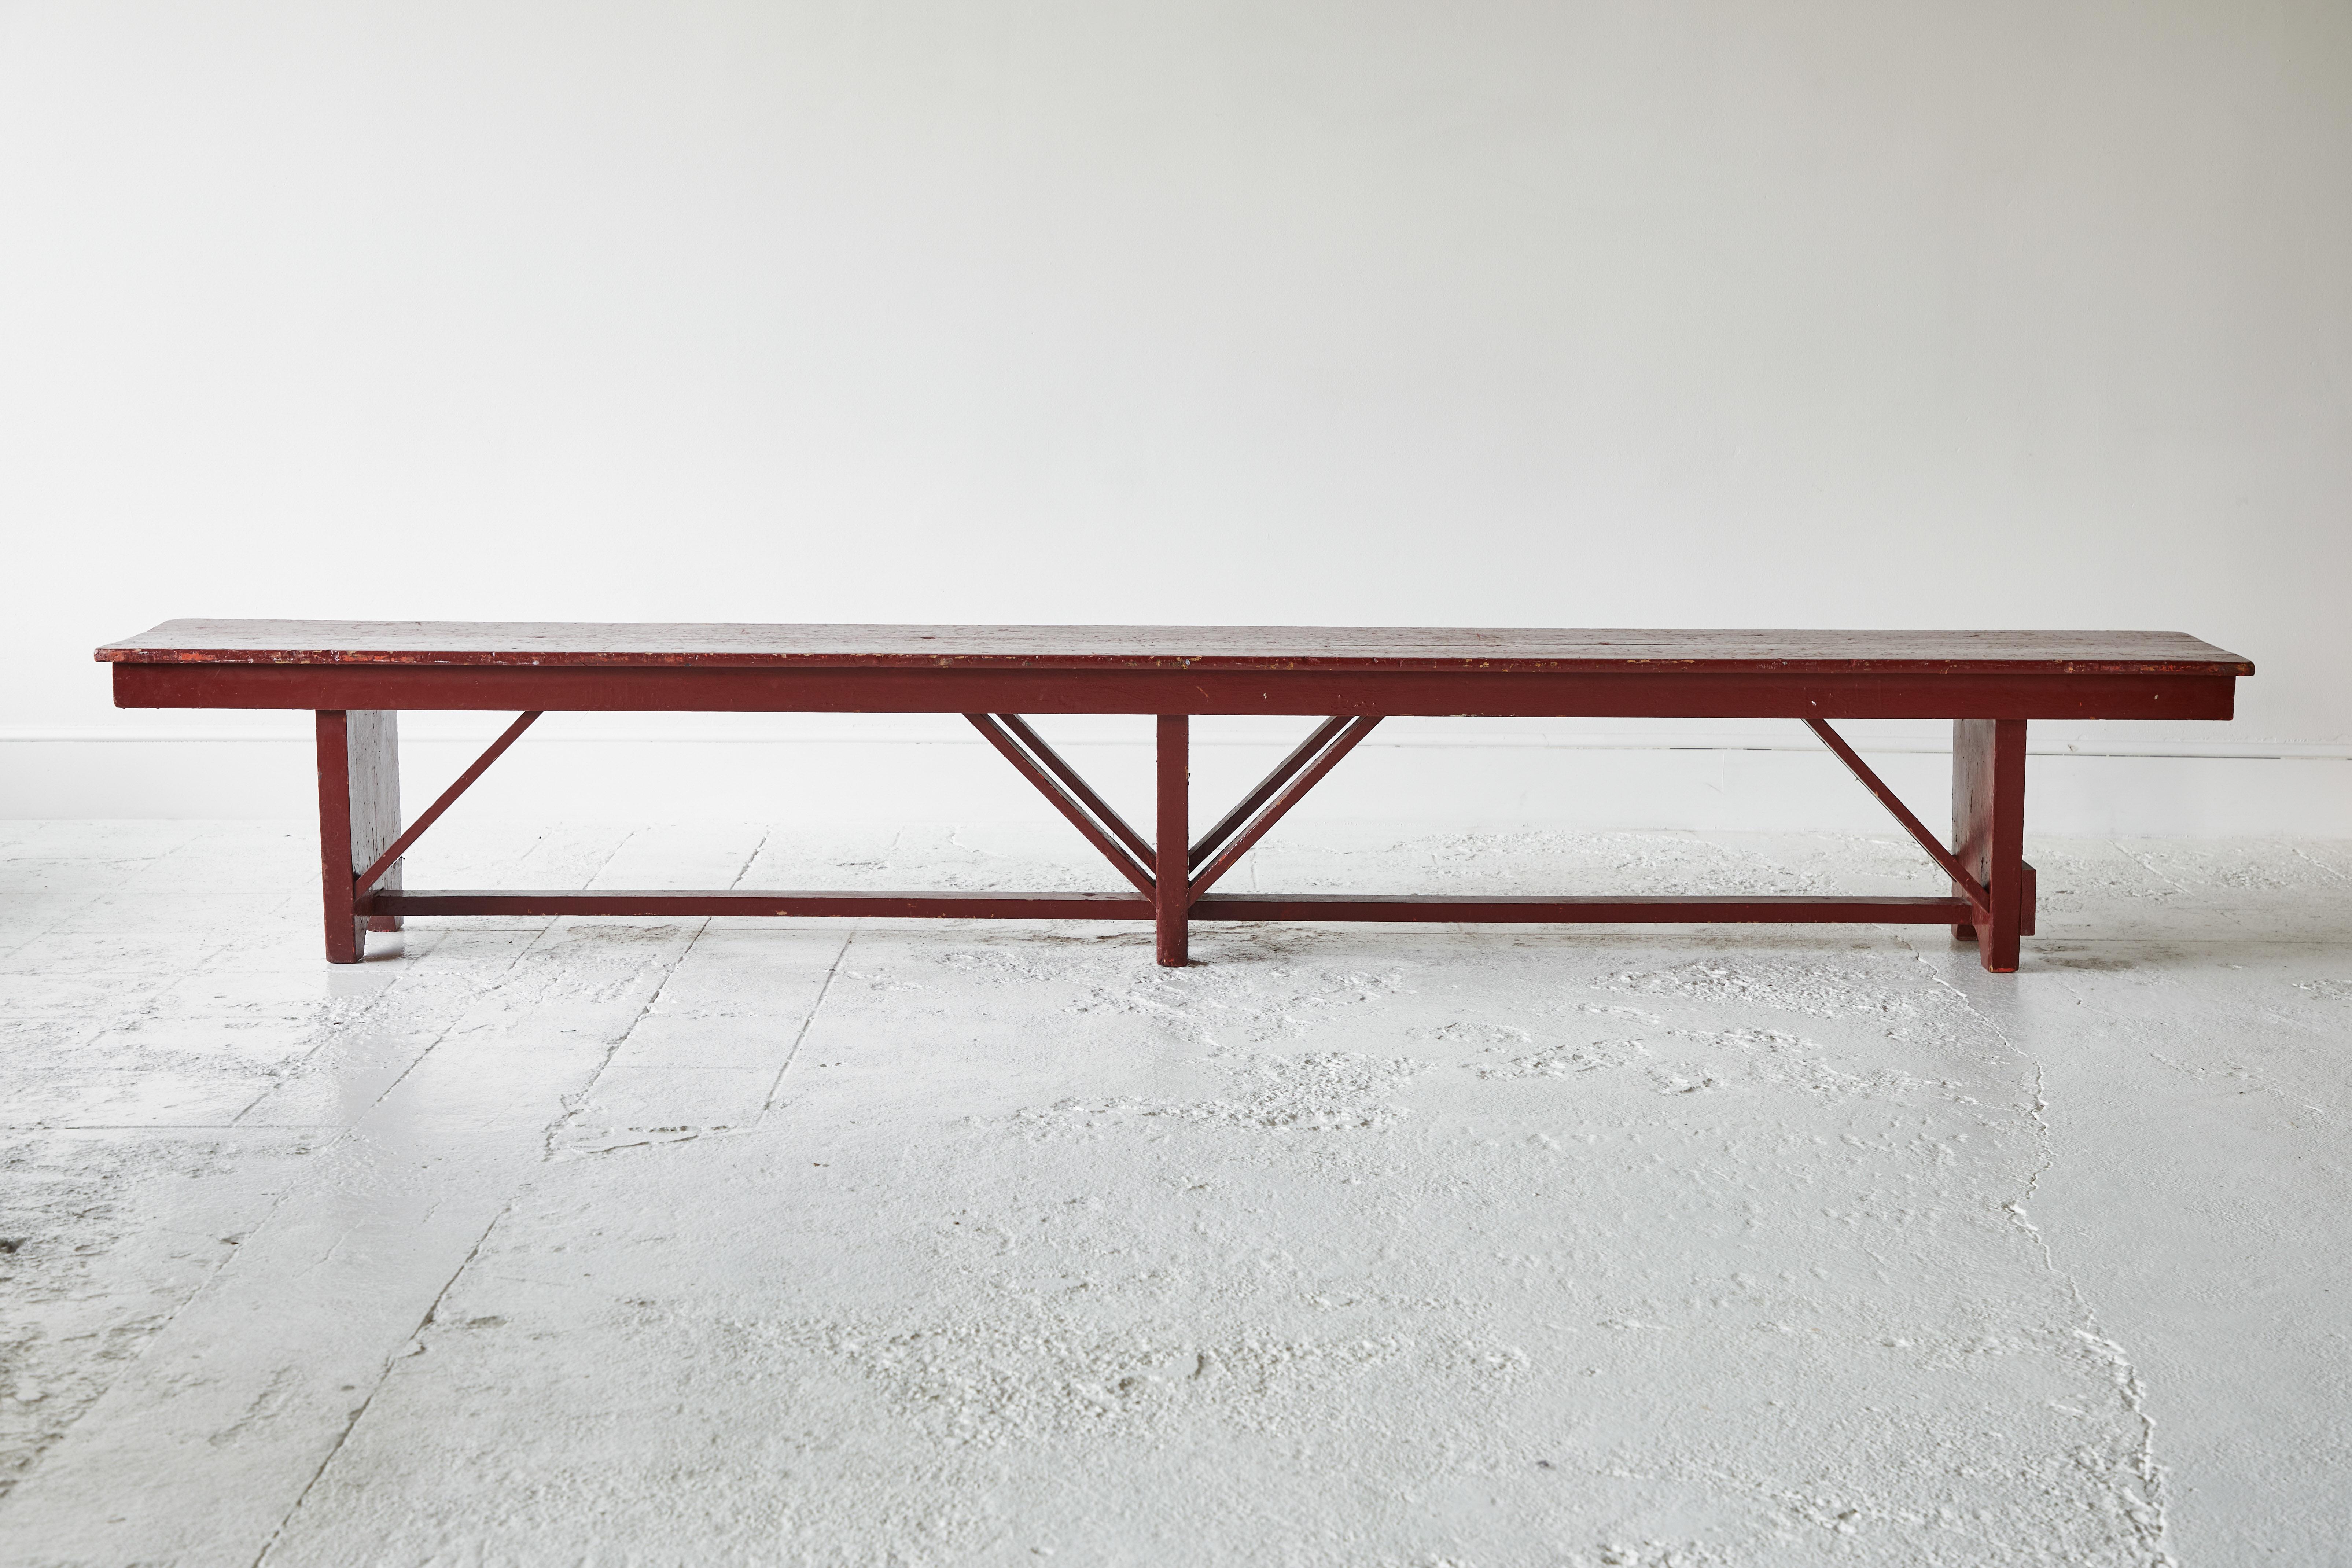 Vintage wooden bench painted oxblood red with cross bars and a center leg support. The paint has not been altered which adds to the character and charm.
 